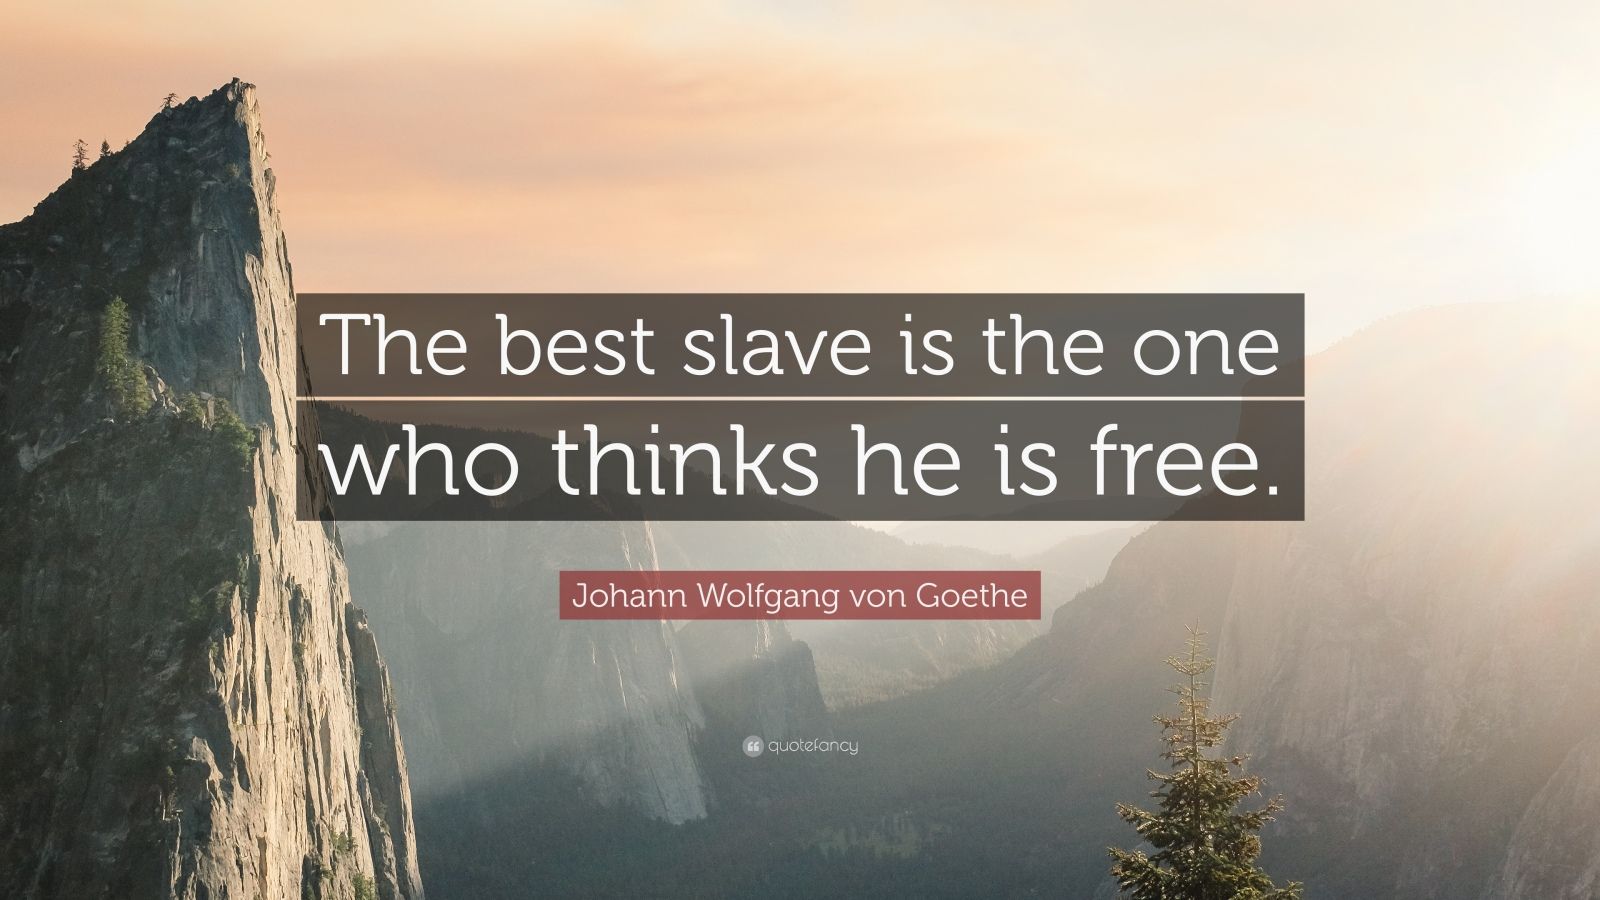 Johann Wolfgang von Goethe Quote: “The best slave is the one who thinks ...